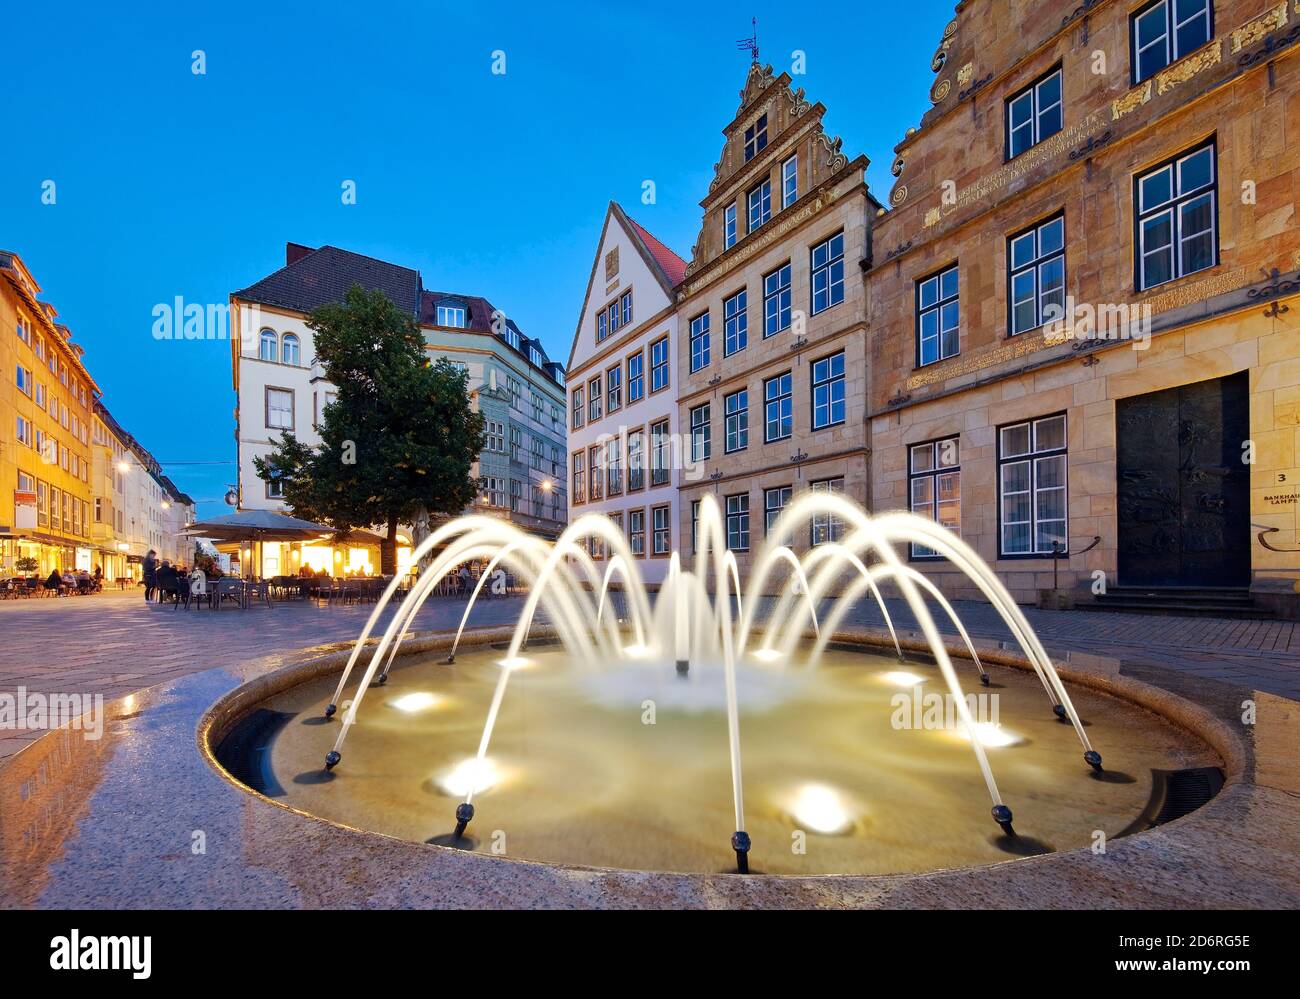 old market with fountain and old houses in the evening, Germany, North Rhine-Westphalia, East Westphalia, Bielefeld Stock Photo